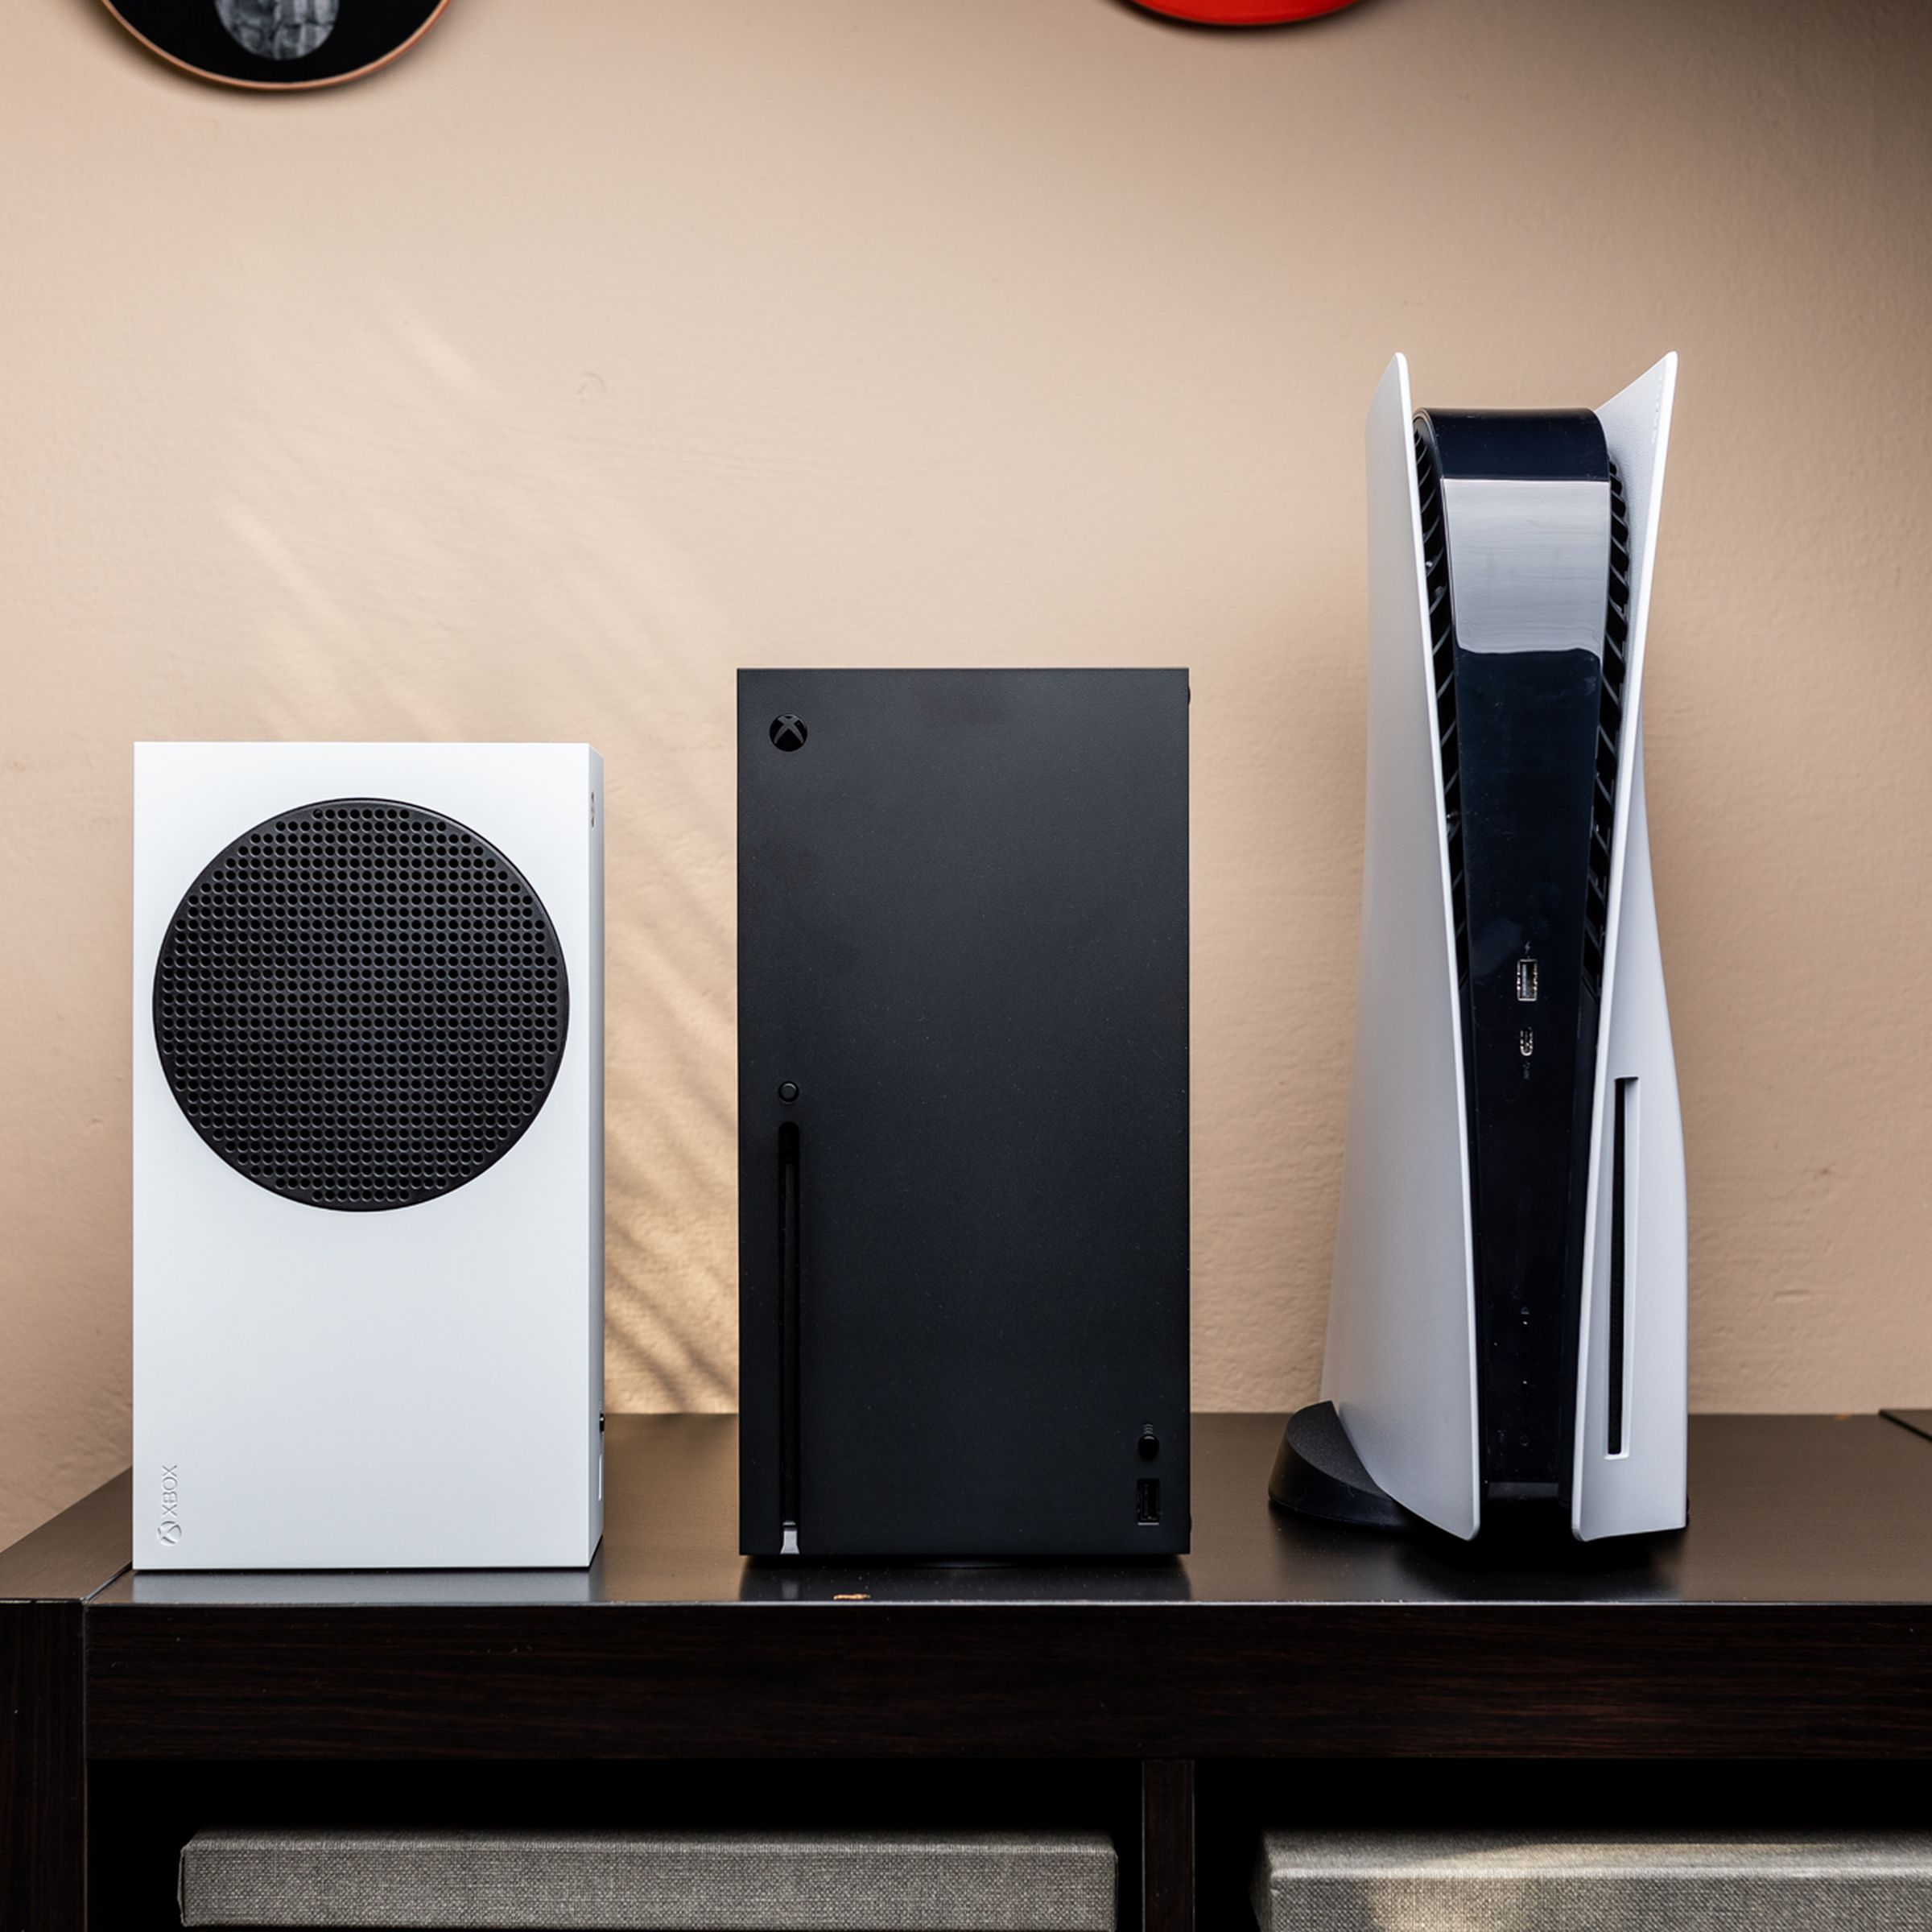 Left to right: the Xbox Series S, Xbox Series X, and PlayStation 5 consoles standing vertically on a TV cabinet.